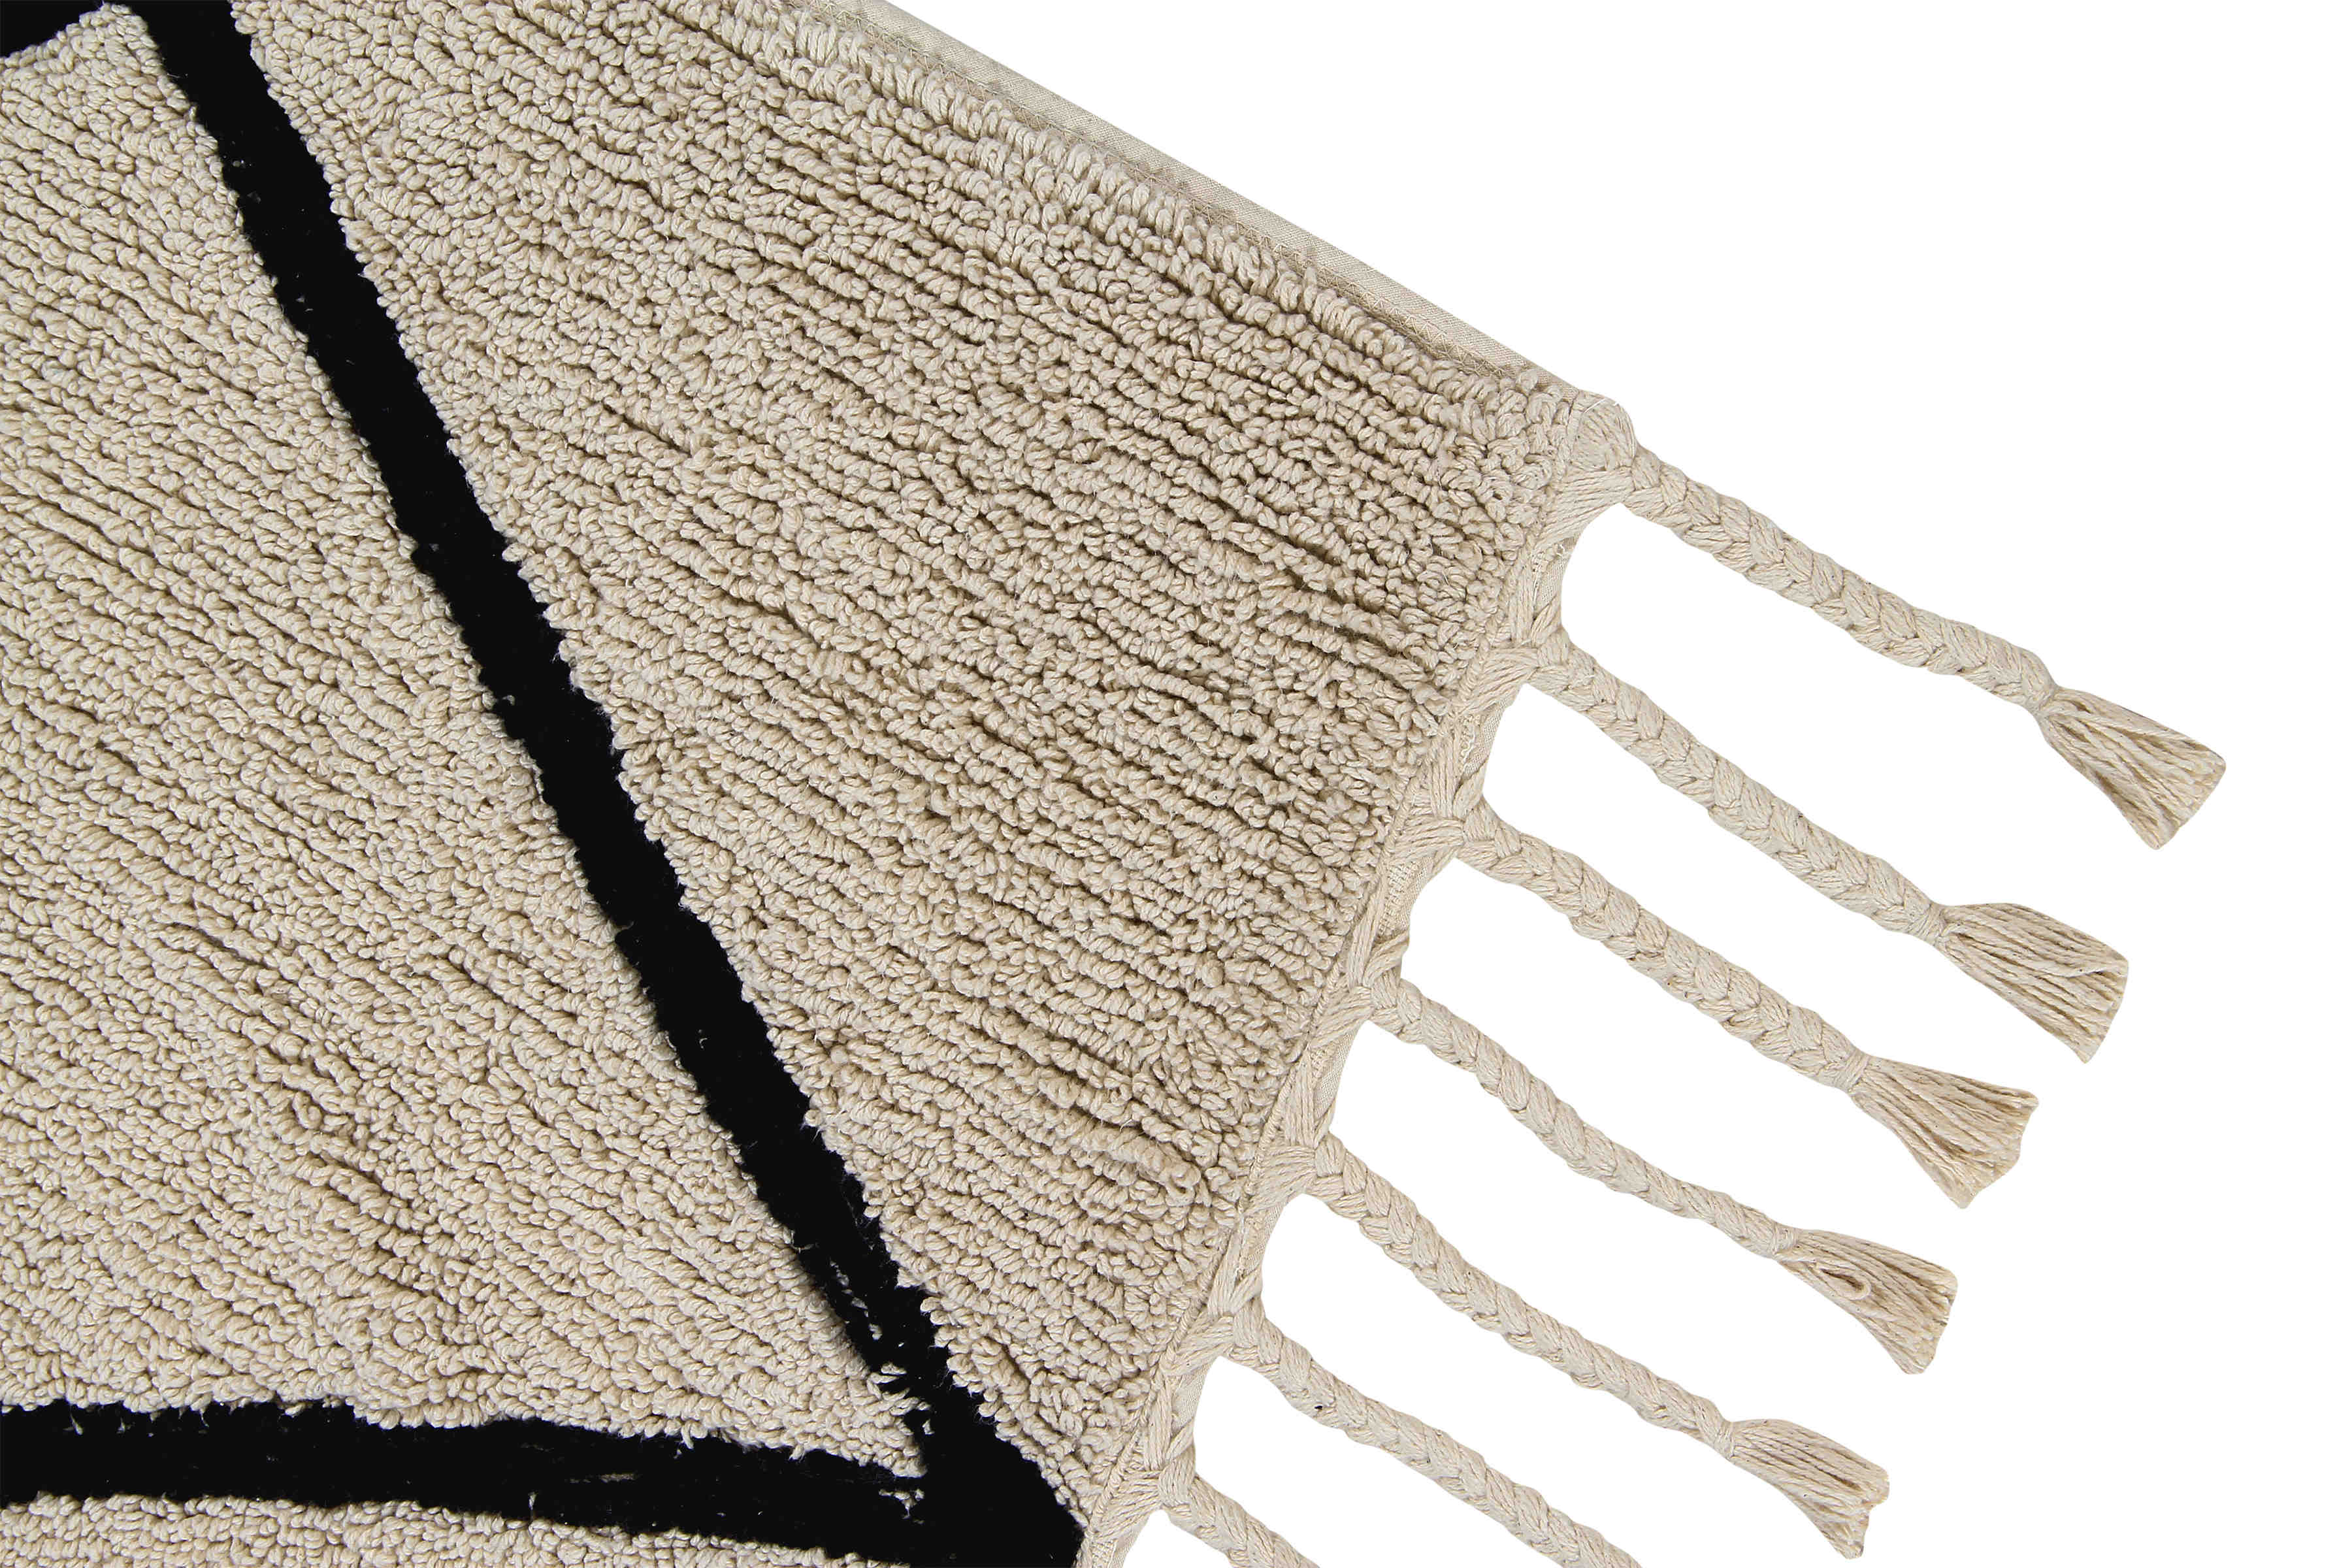 Rectangular beige cotton rug decorated with a black geometric tribal design and braided border